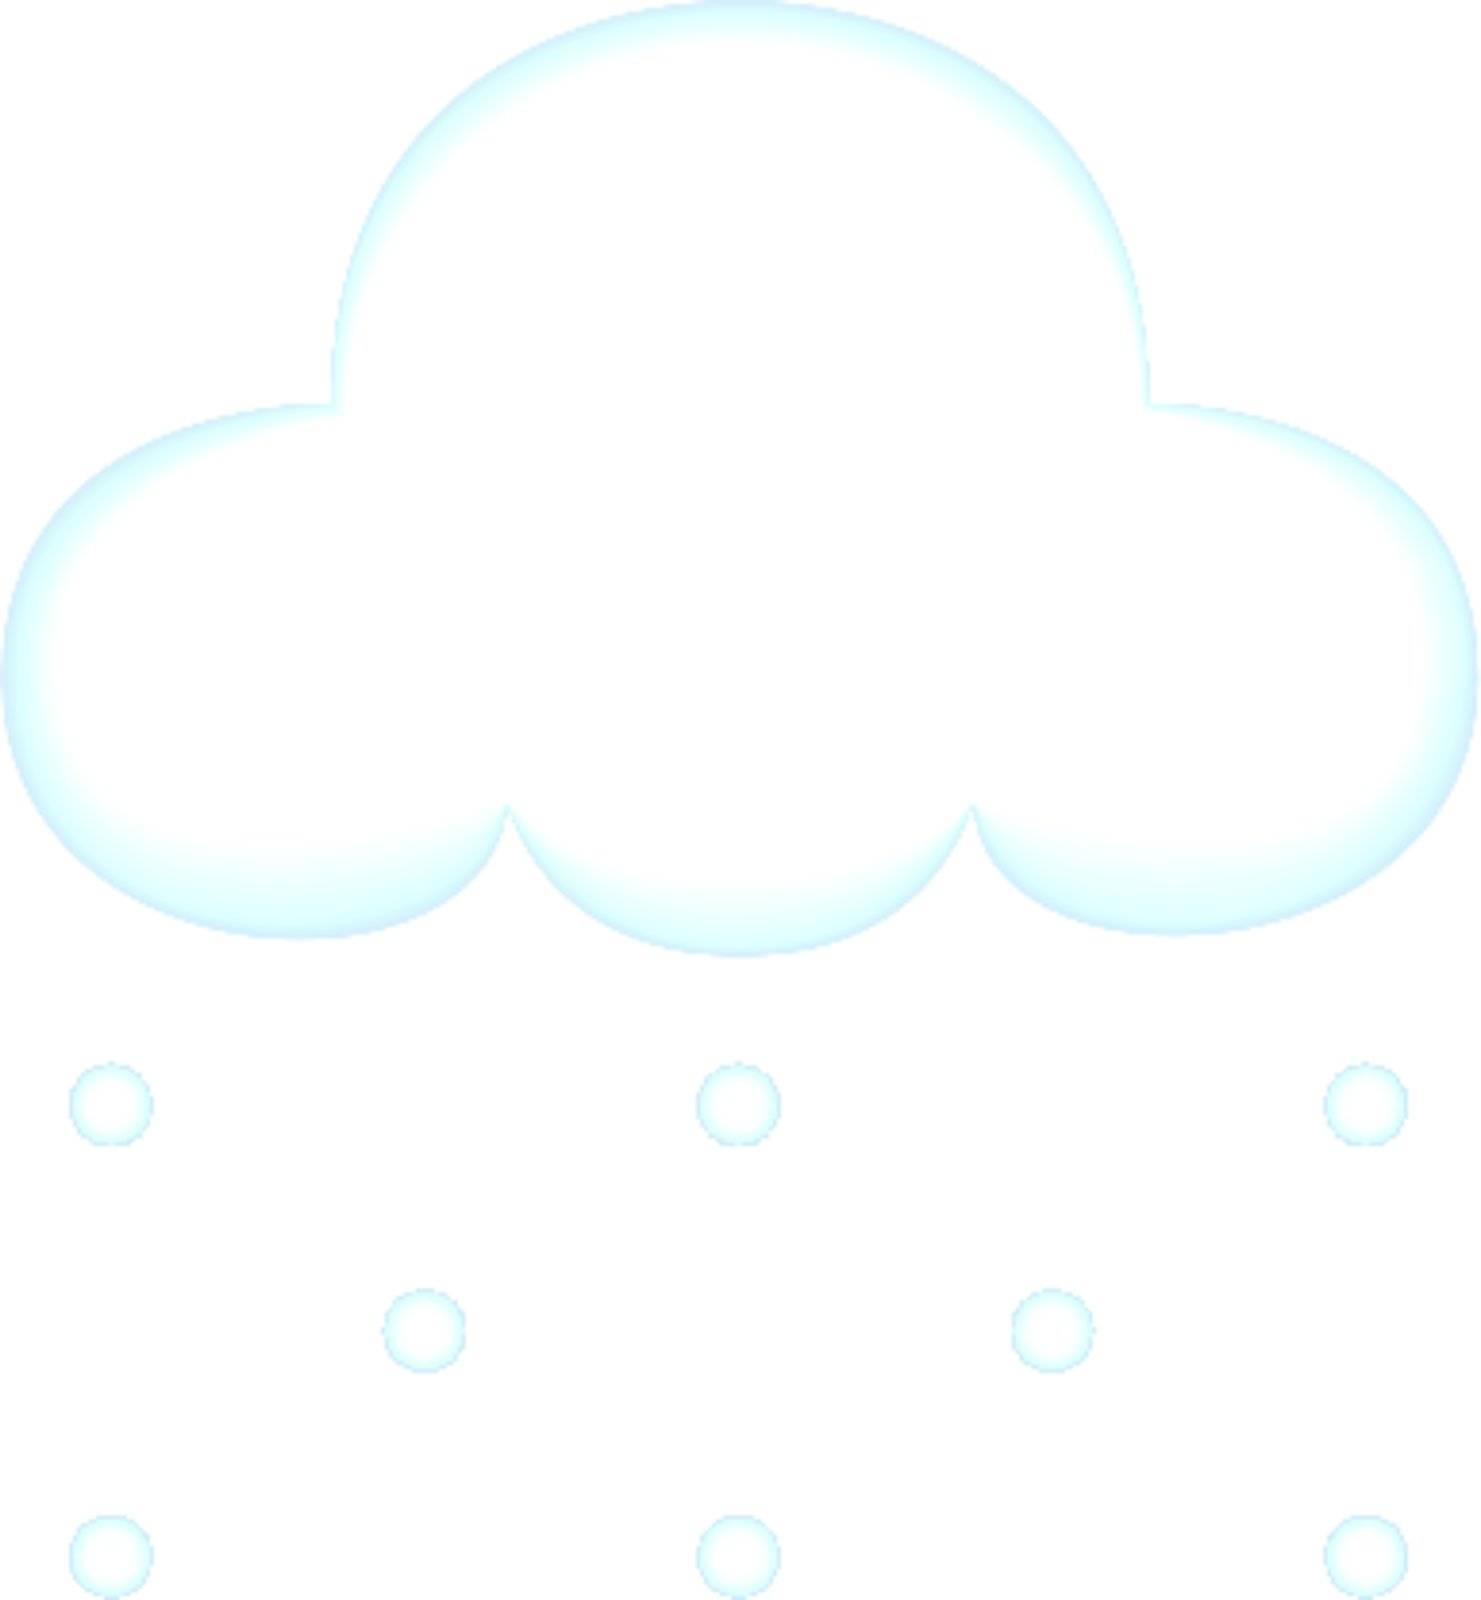 Weather Illustration - Snow Falling From Cloud (jpeg file has clipping path)